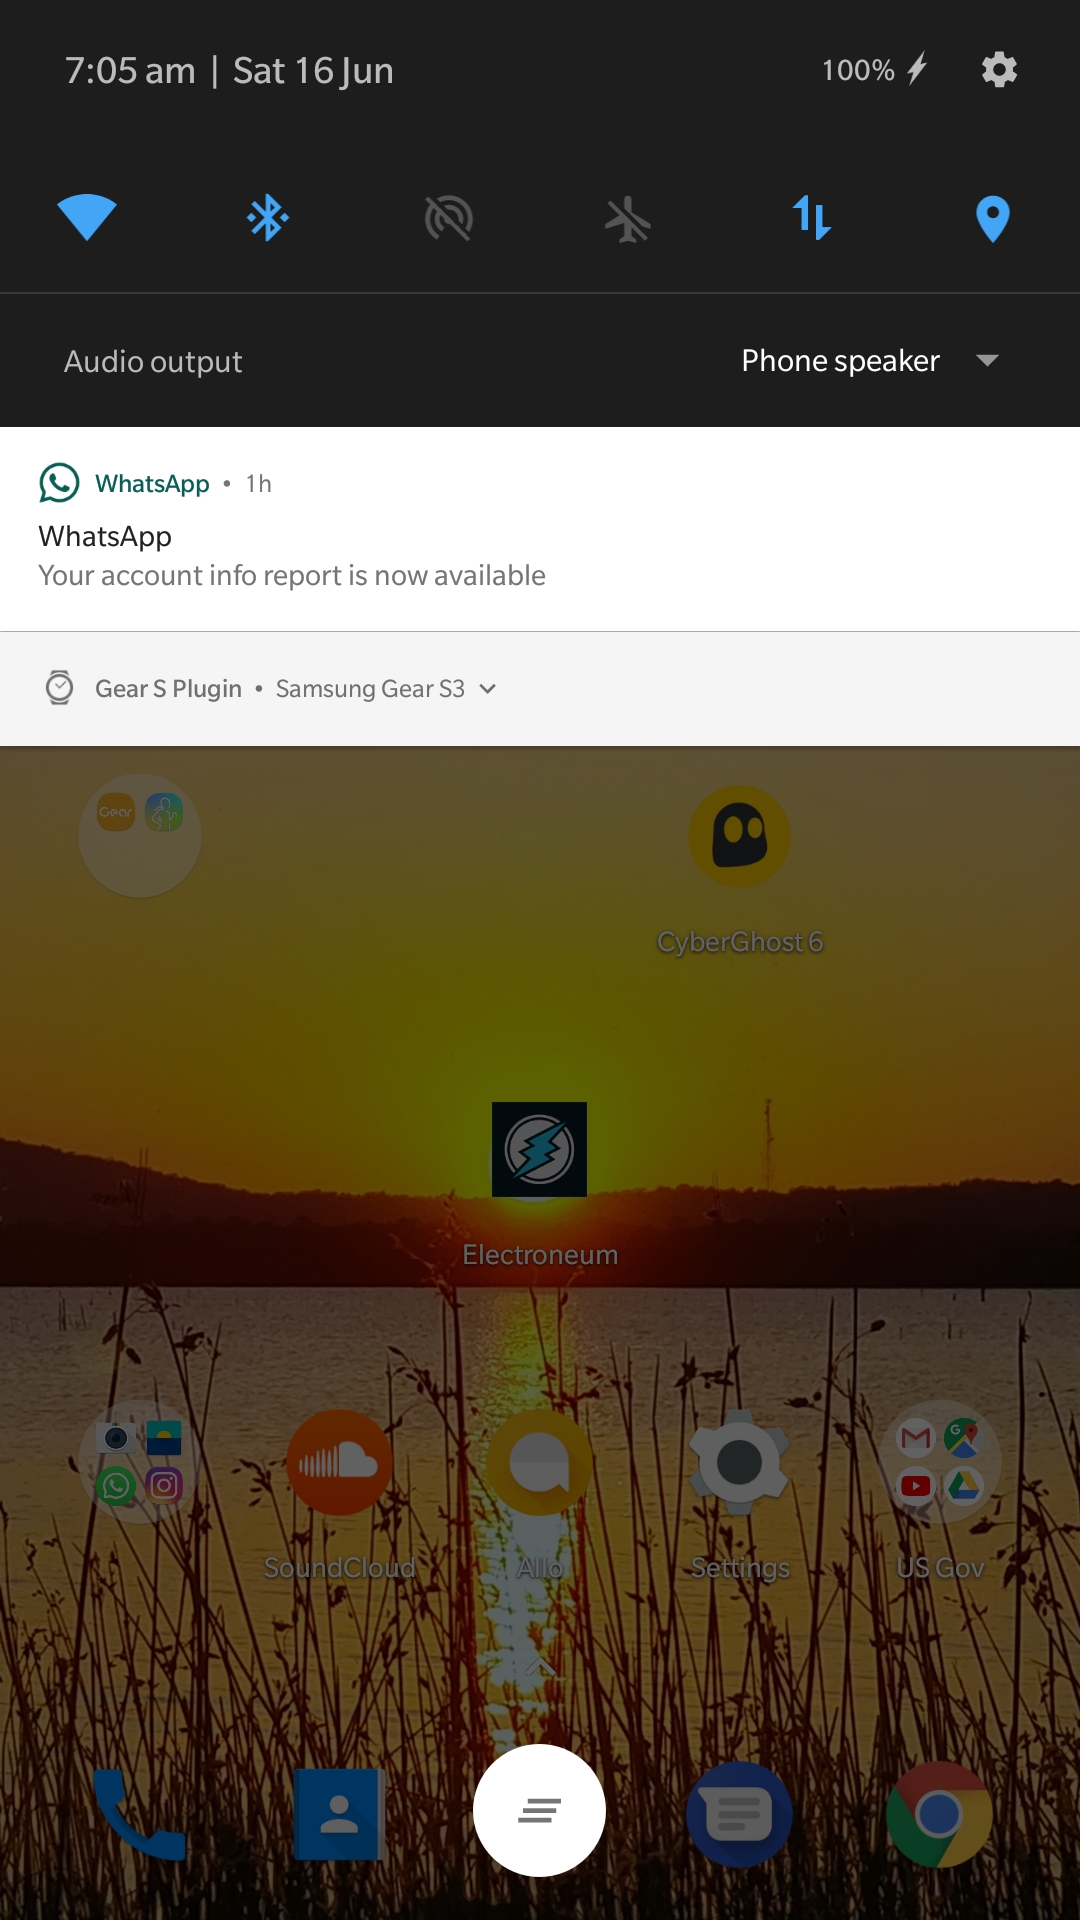 WhatsApp Account Info Available Notification